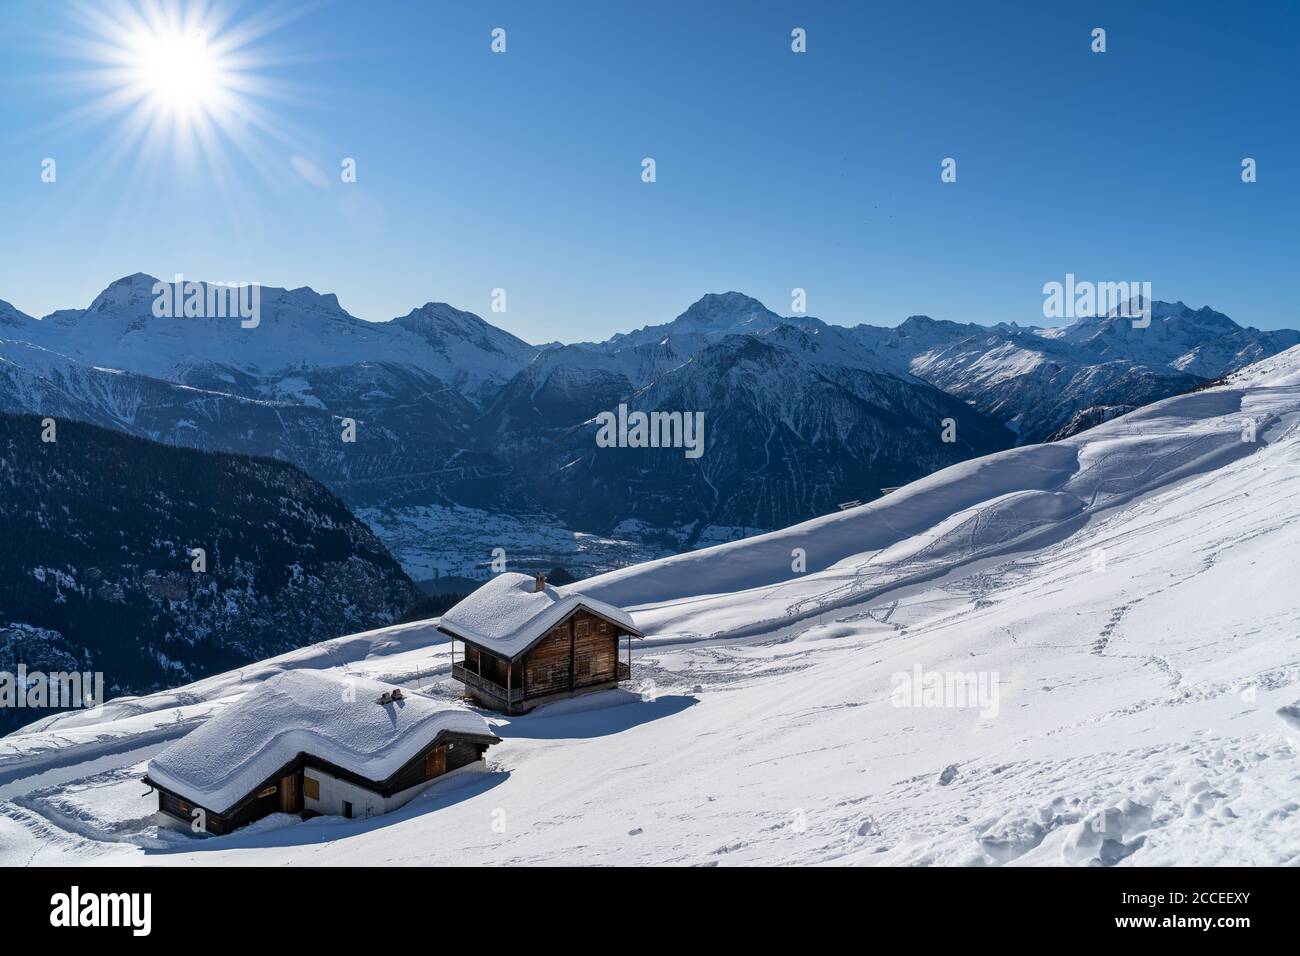 Europe, Switzerland, Valais, Belalp, view of the Lepontine Alps with the Simplon Pass Stock Photo